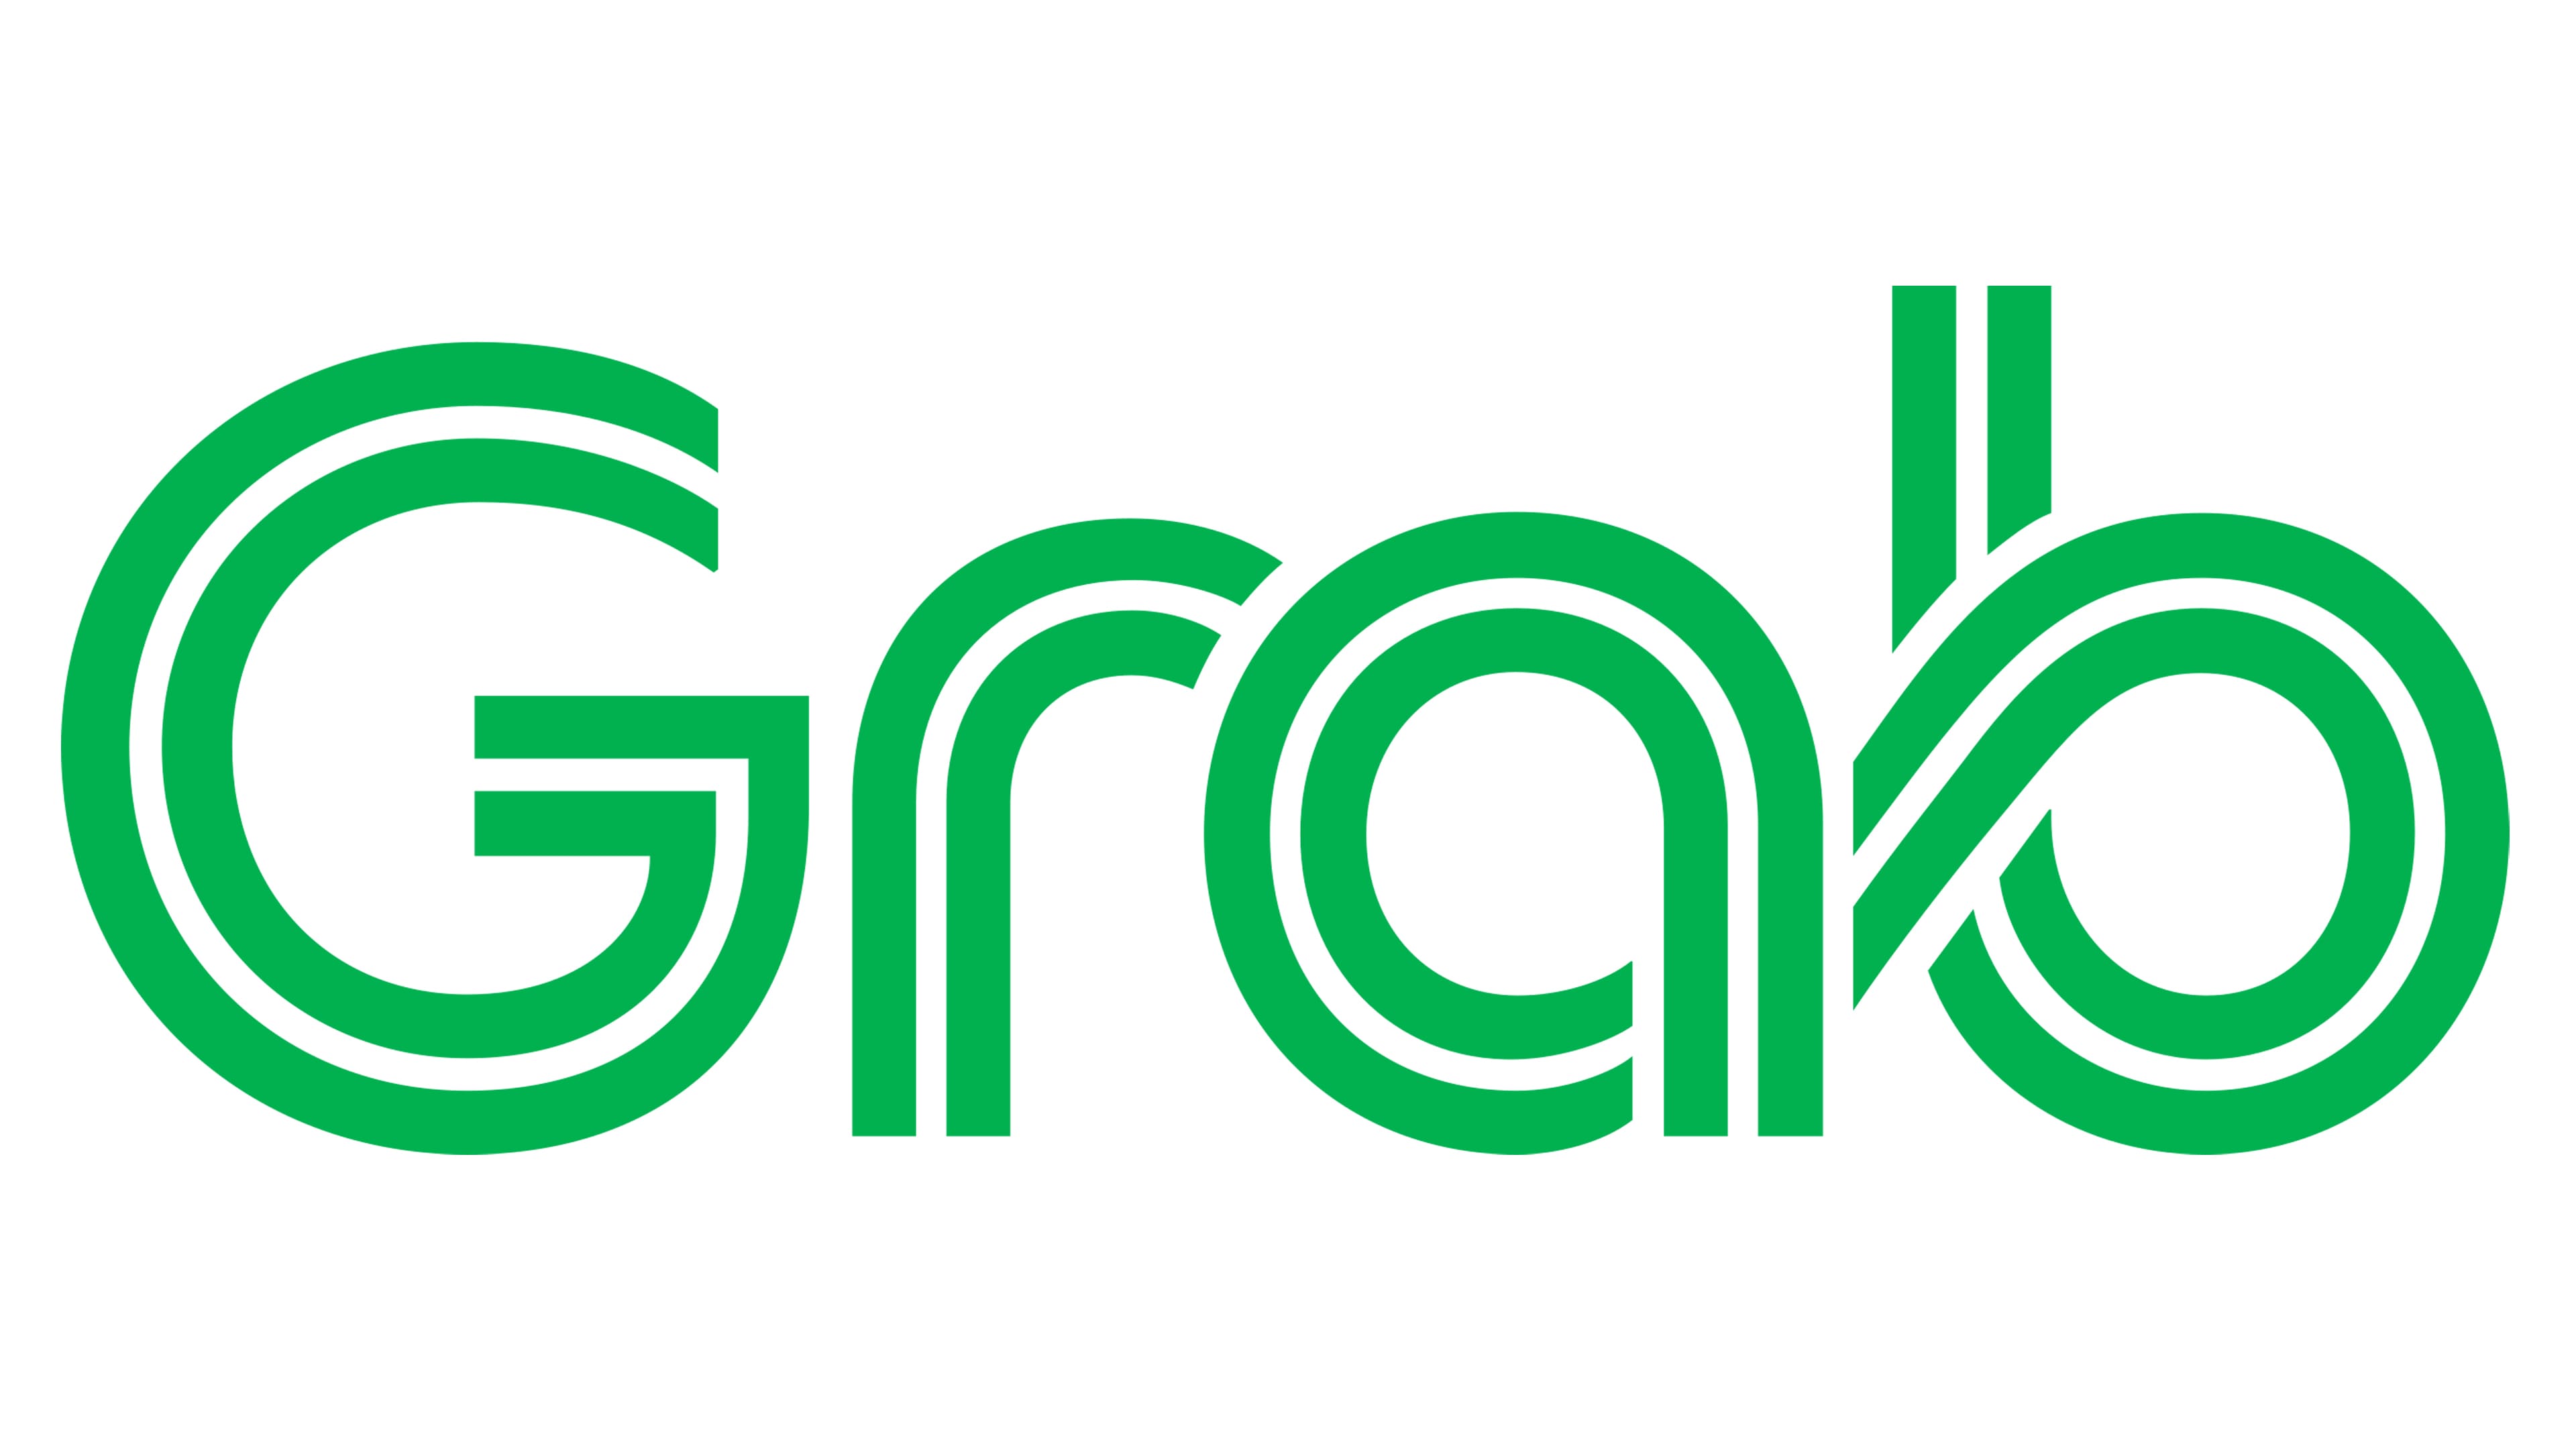 Grab Logo and symbol, meaning, history, PNG, brand